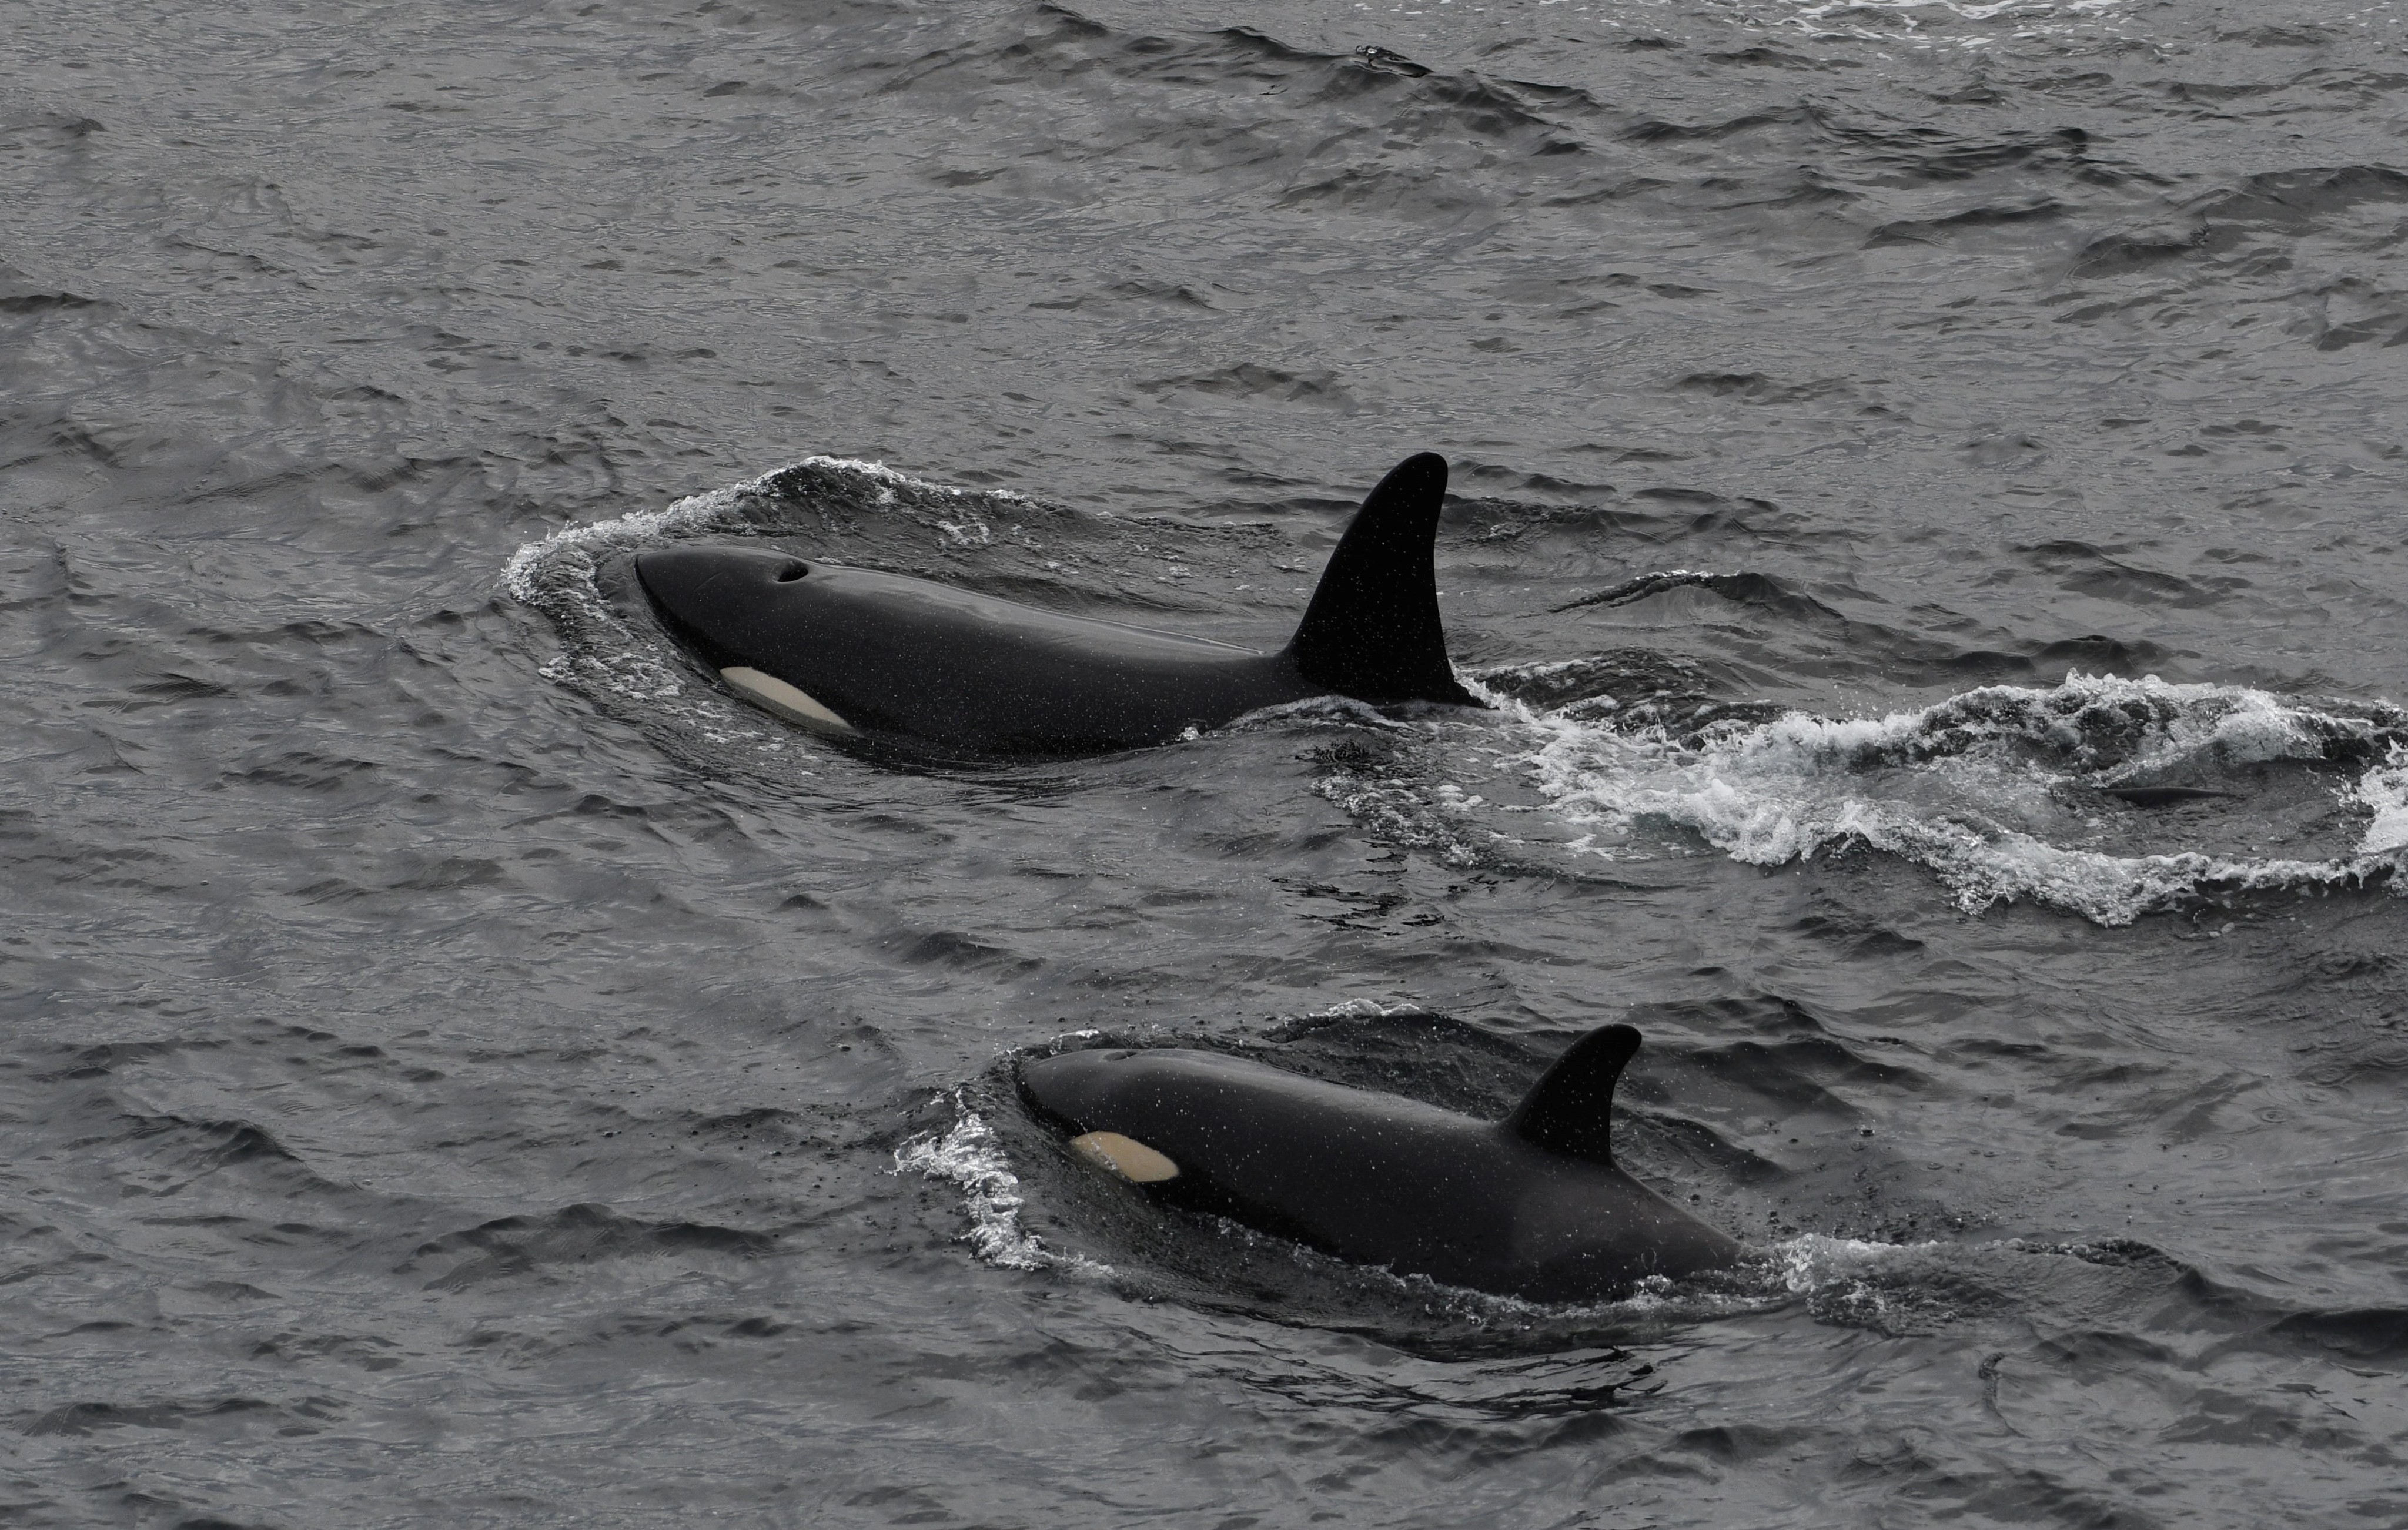 POD OF ORCAS SIGHTED CLOSE TO SHORE ON MAY 25TH OFF BURWICK. COPYRIGHT: ROBERT FOUBISTER. 